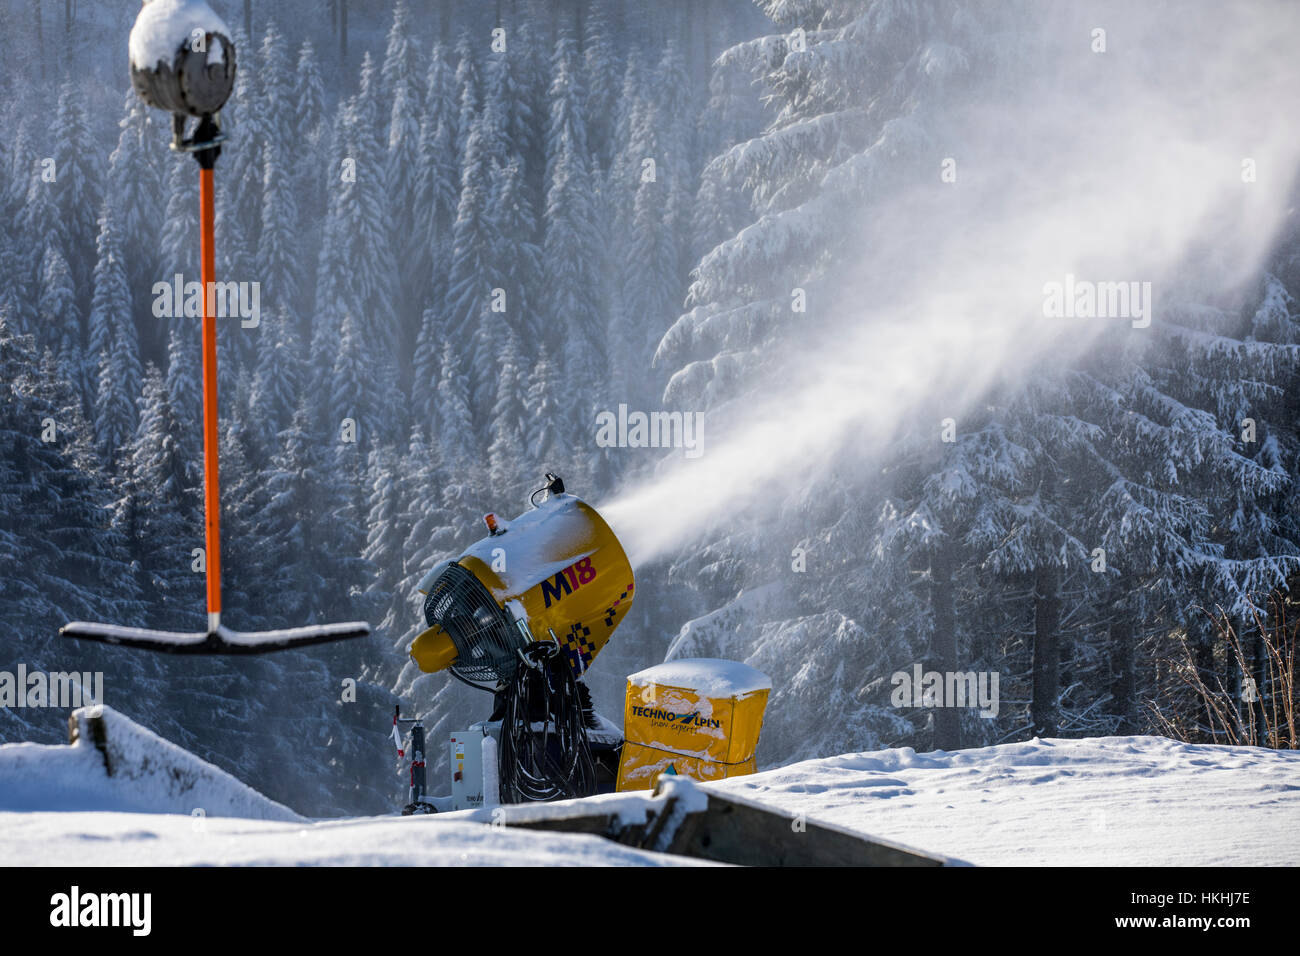 Professional Artificial Snow Machine Cannon Making Snowflakes From Water At  Ski Resort Stock Photo, Picture and Royalty Free Image. Image 90232119.